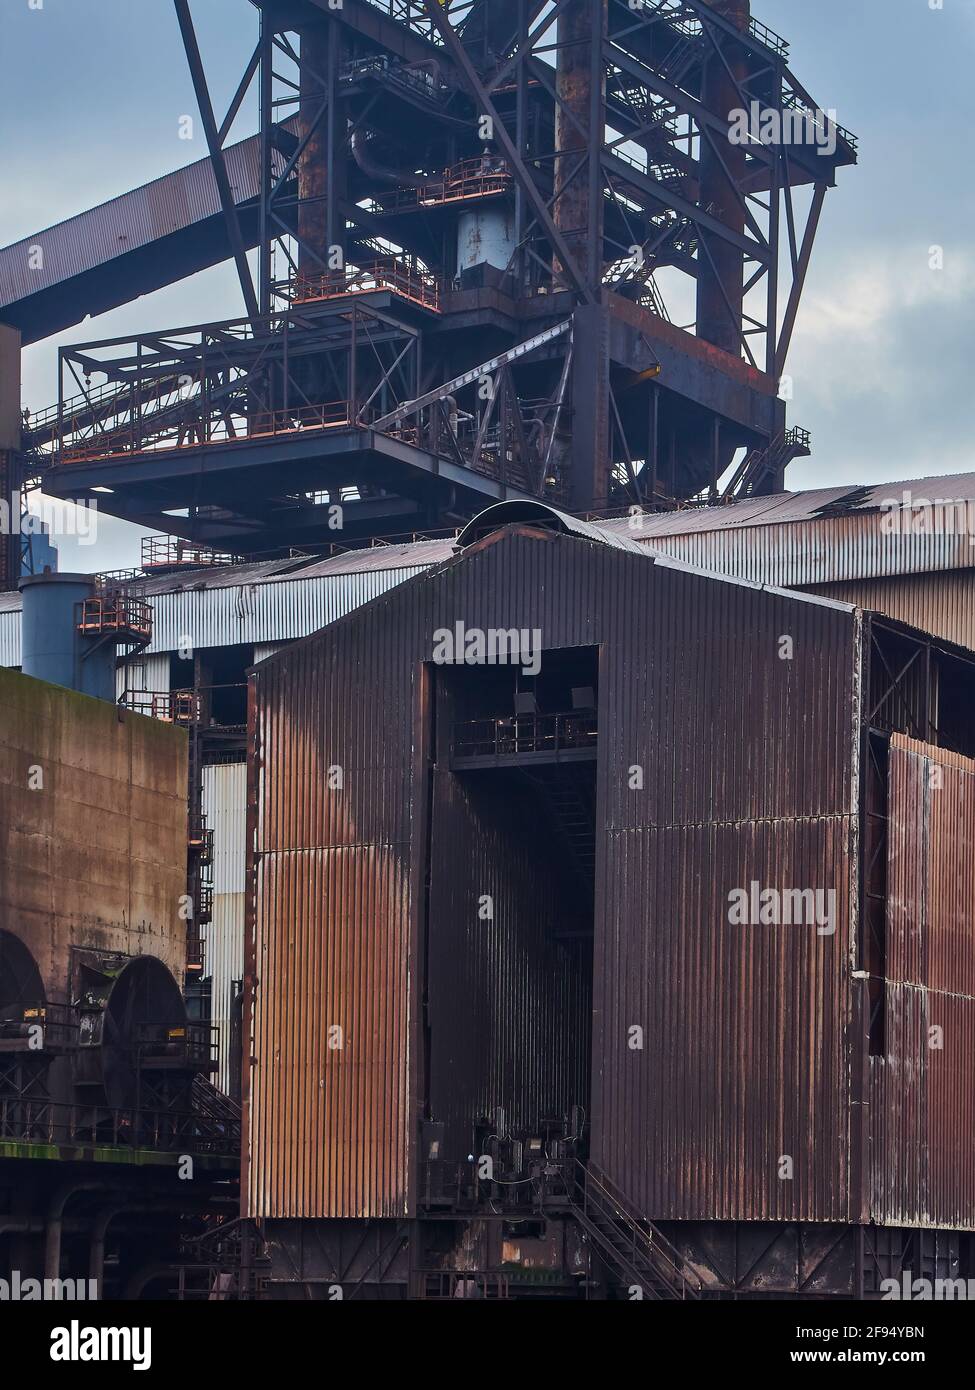 A detail from the abandoned Redcar Steelworks complex, showing the intricate web of support structures for the blast furnace and a rusting workshop. Stock Photo